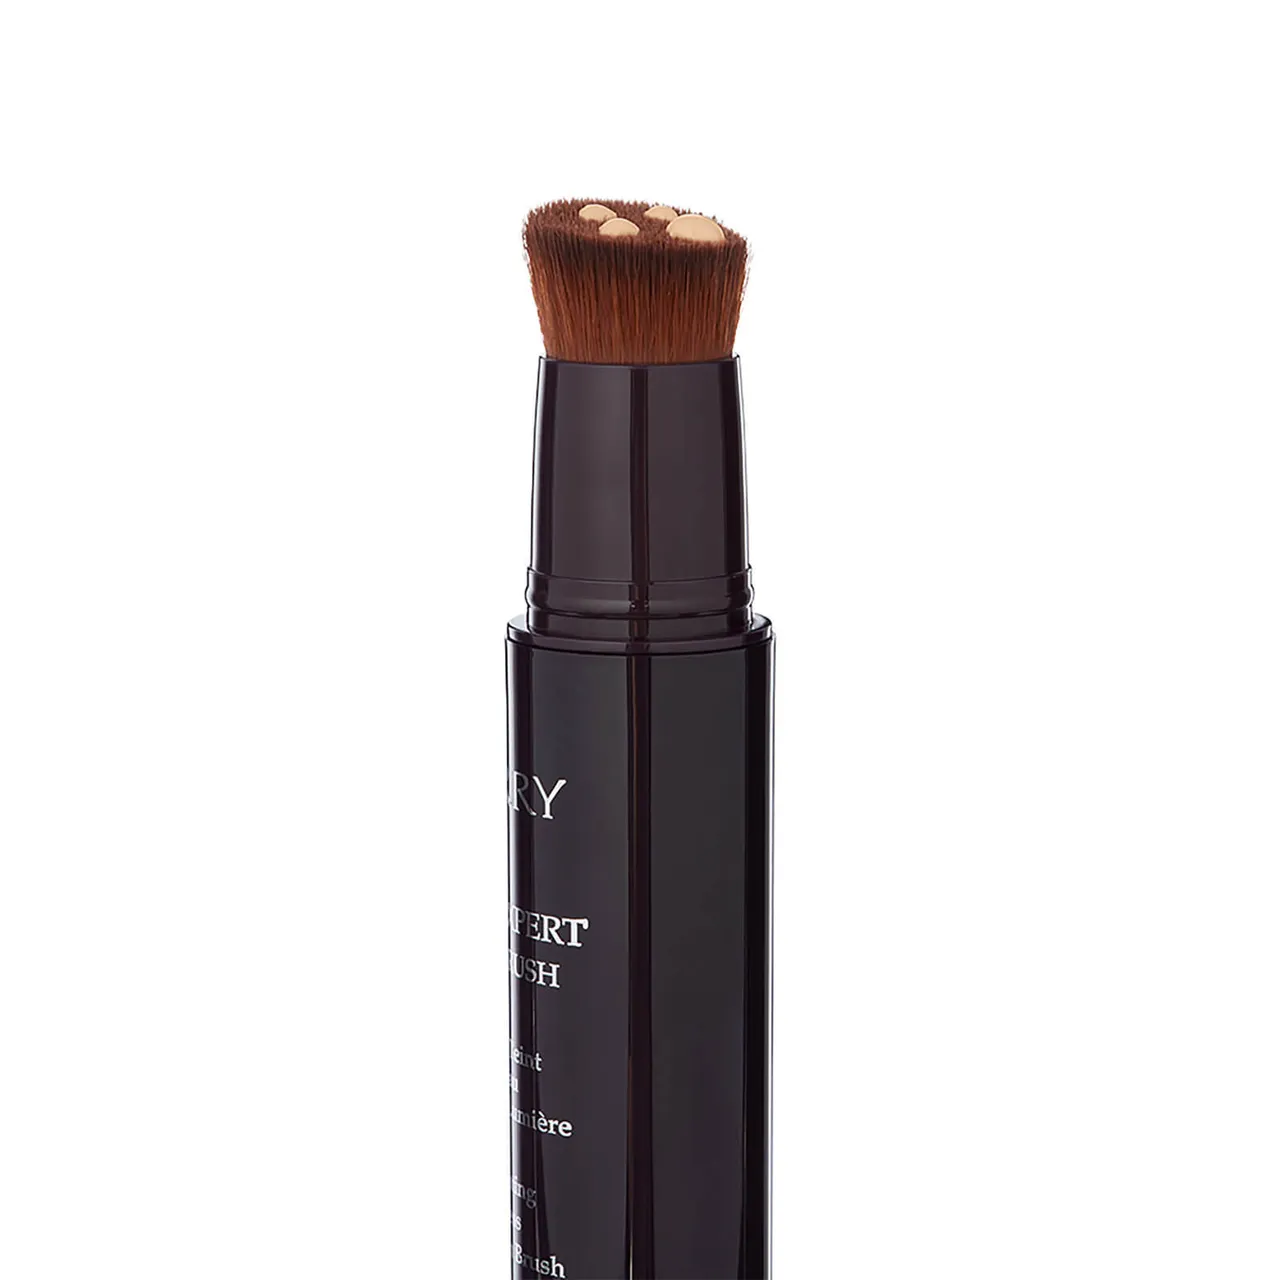 By Terry Light-Expert Click Brush Foundation 19.5ml (Various Shades) - 5. Peach Beige